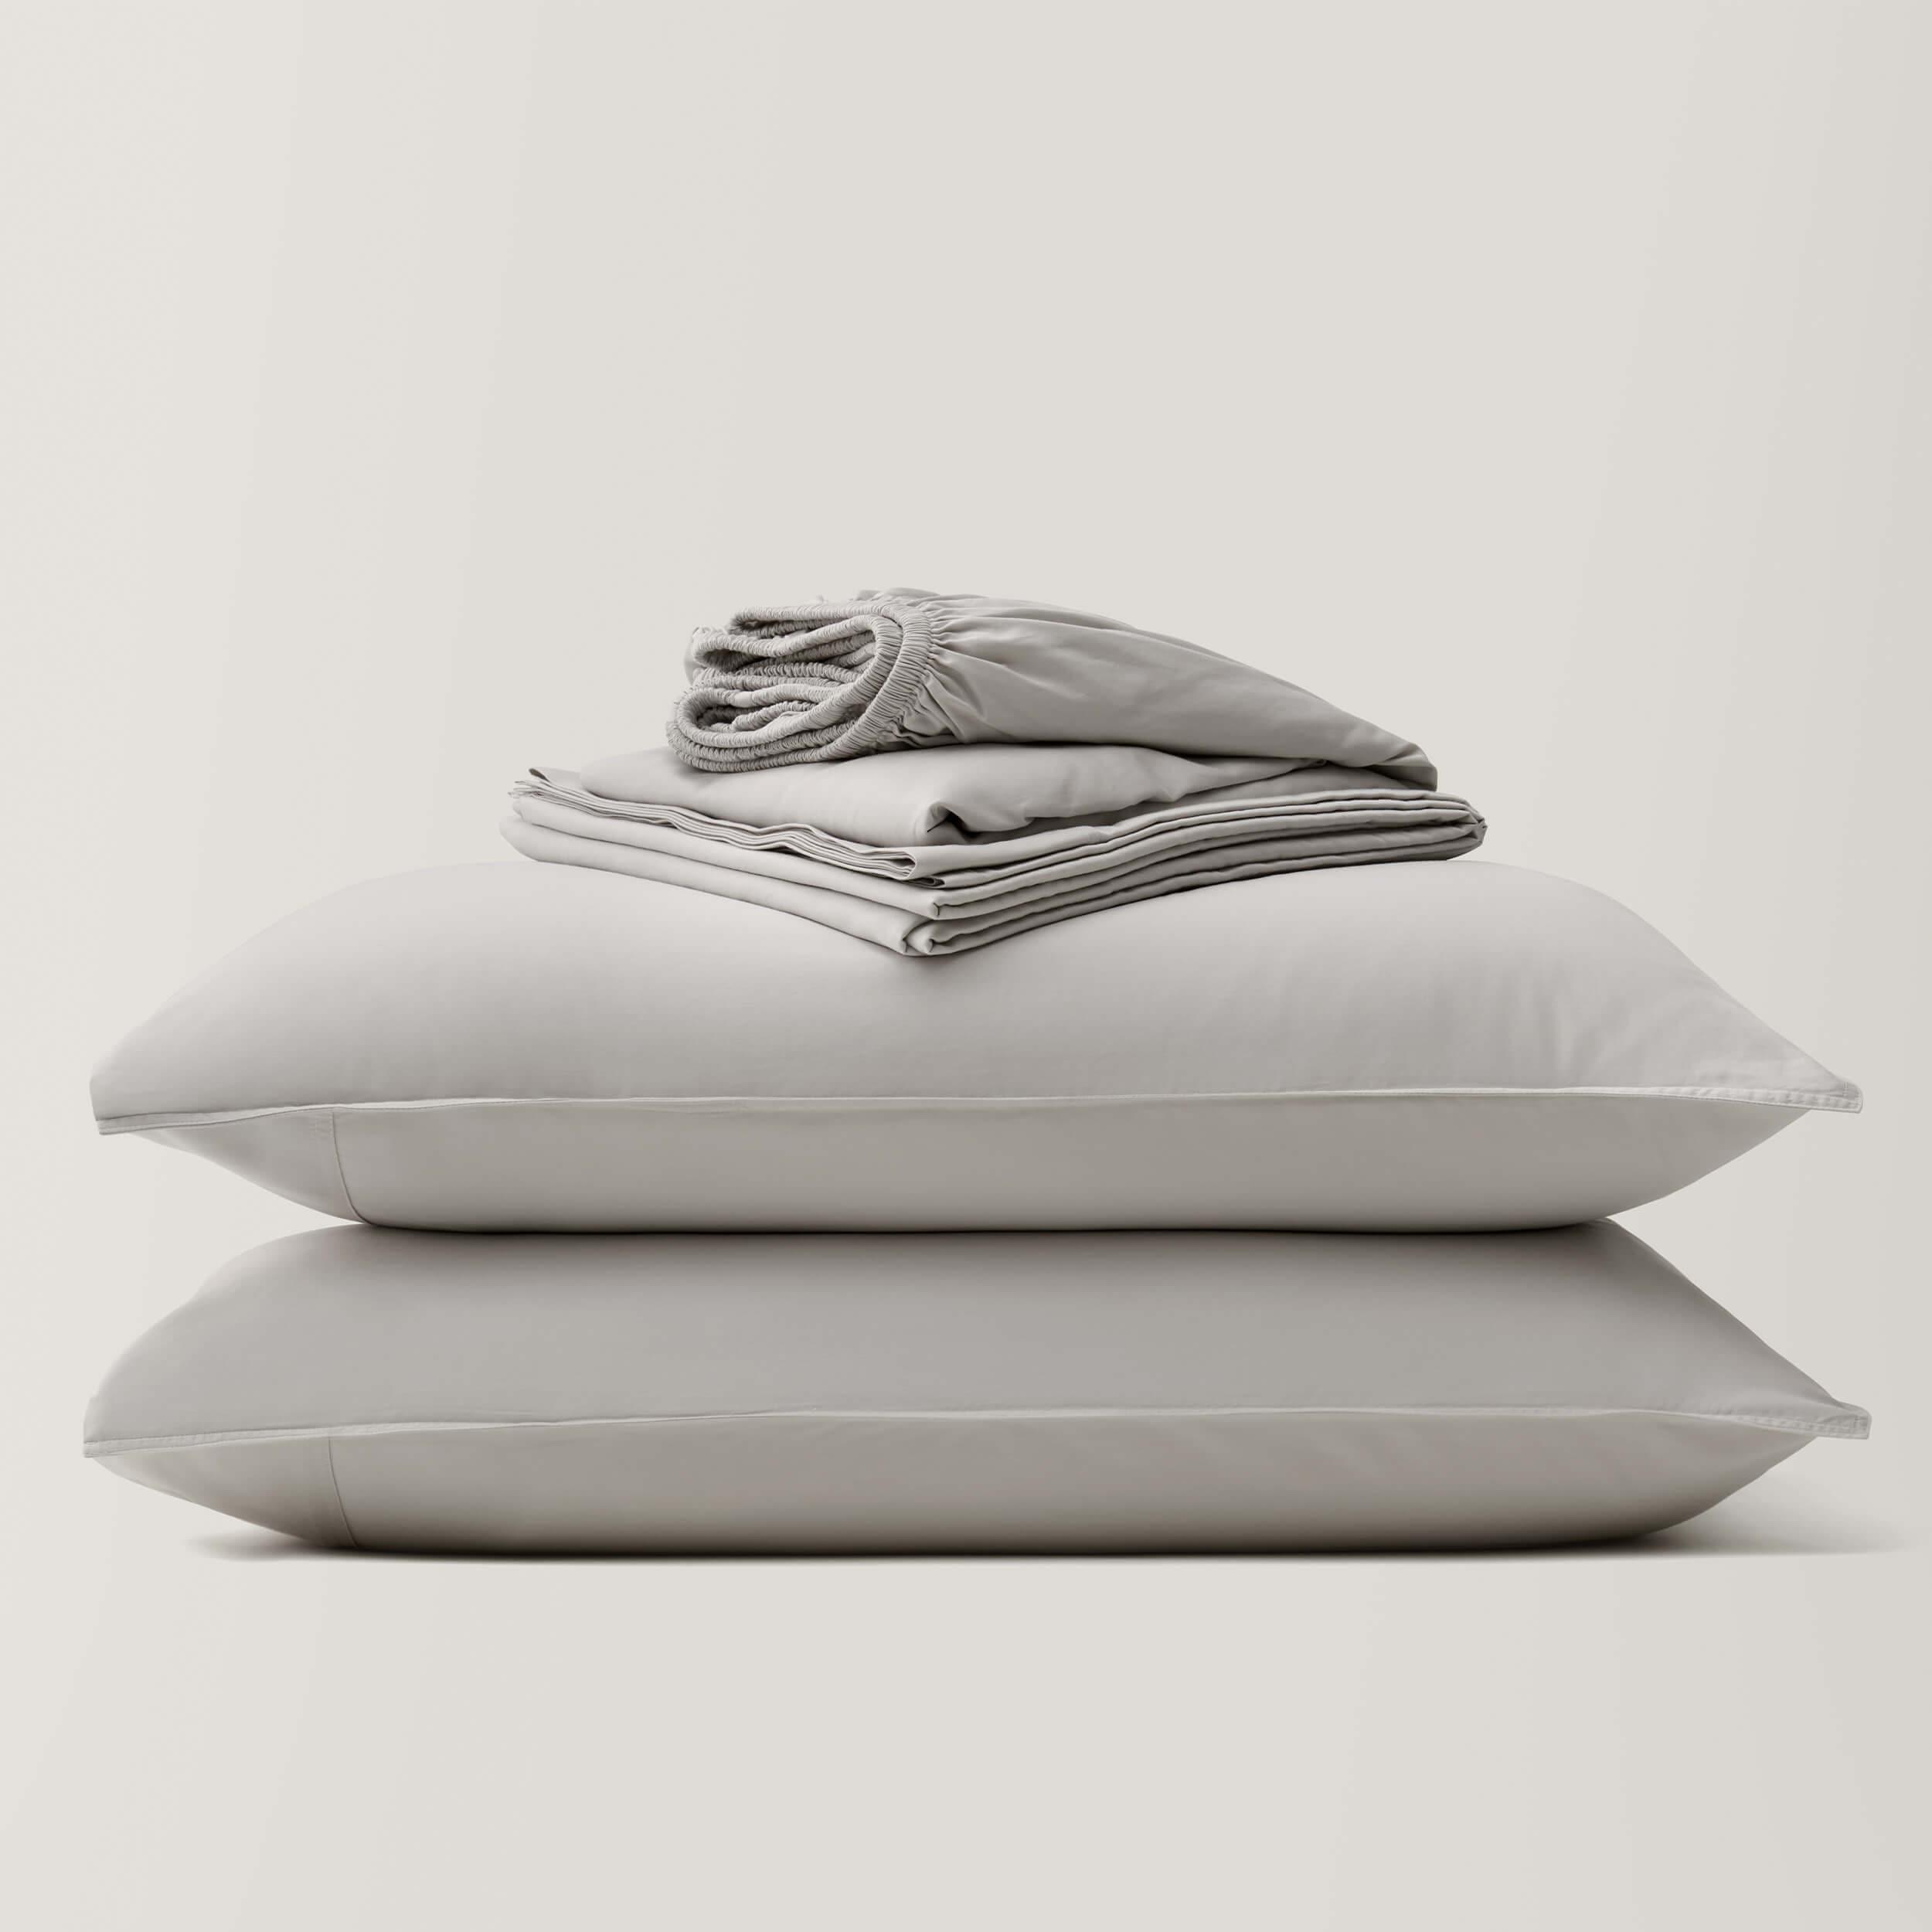 Complete your bedding ensemble with a luxurious king size sheet set.